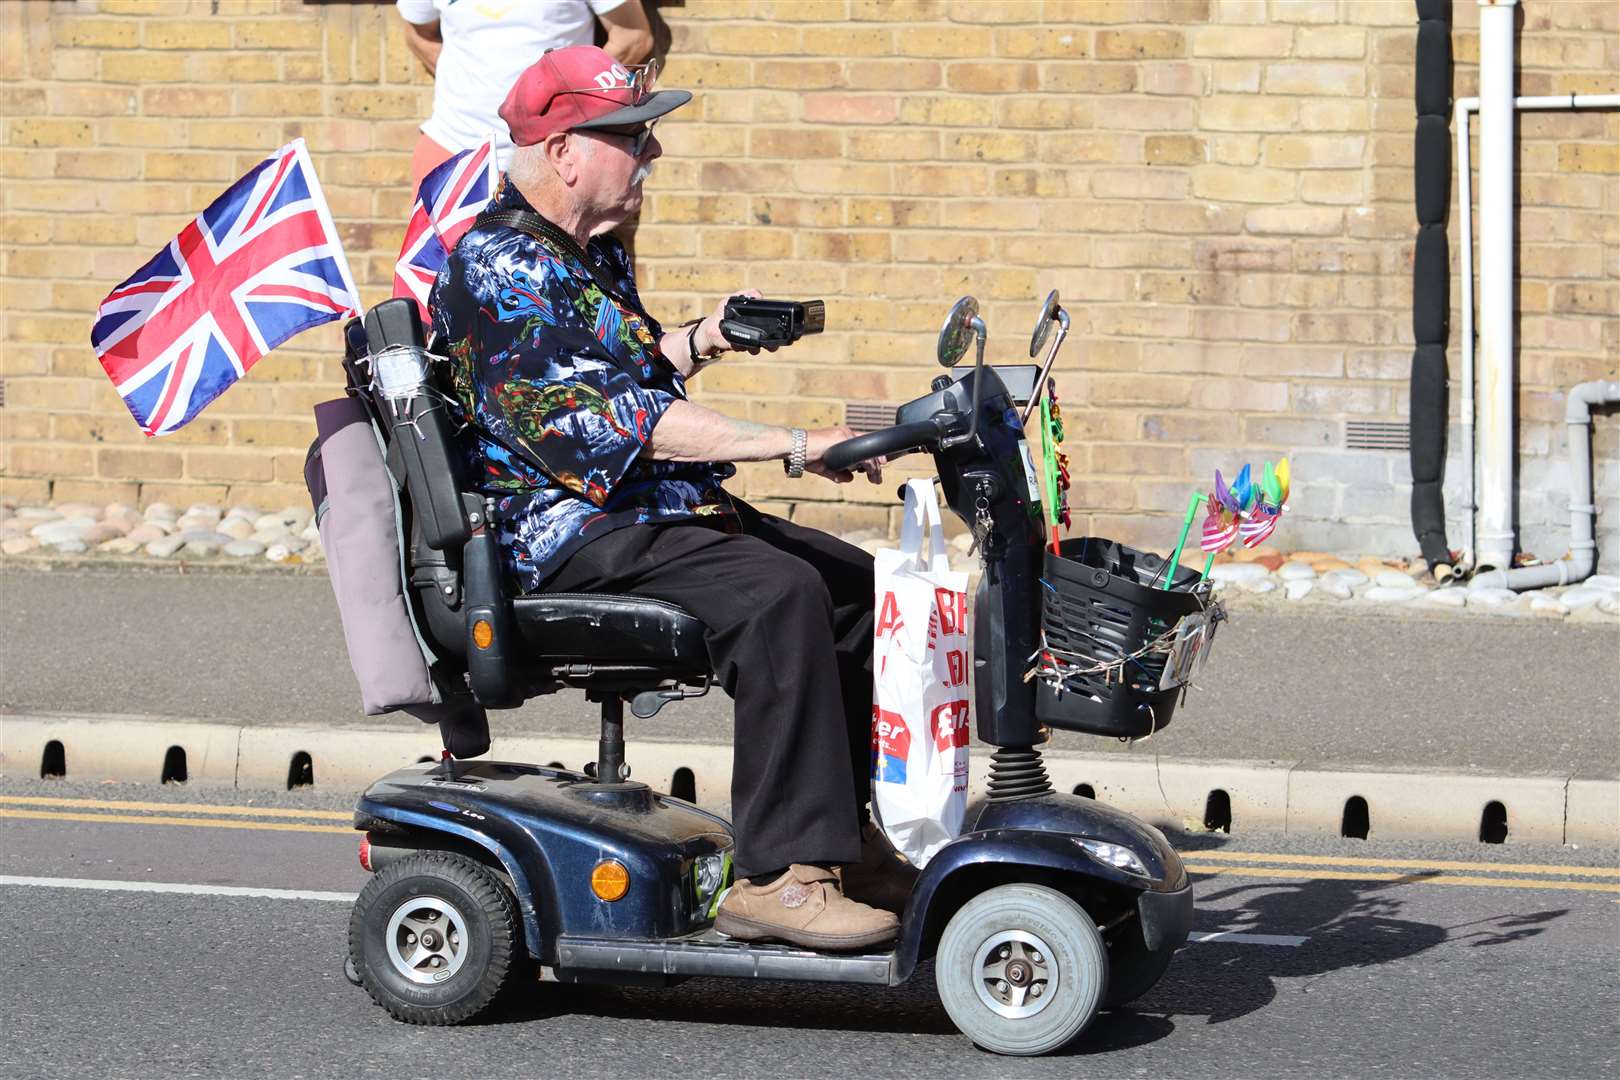 Decorated mobility scooters took to the streets for the Sheppey summer carnival in Sheerness on Saturday